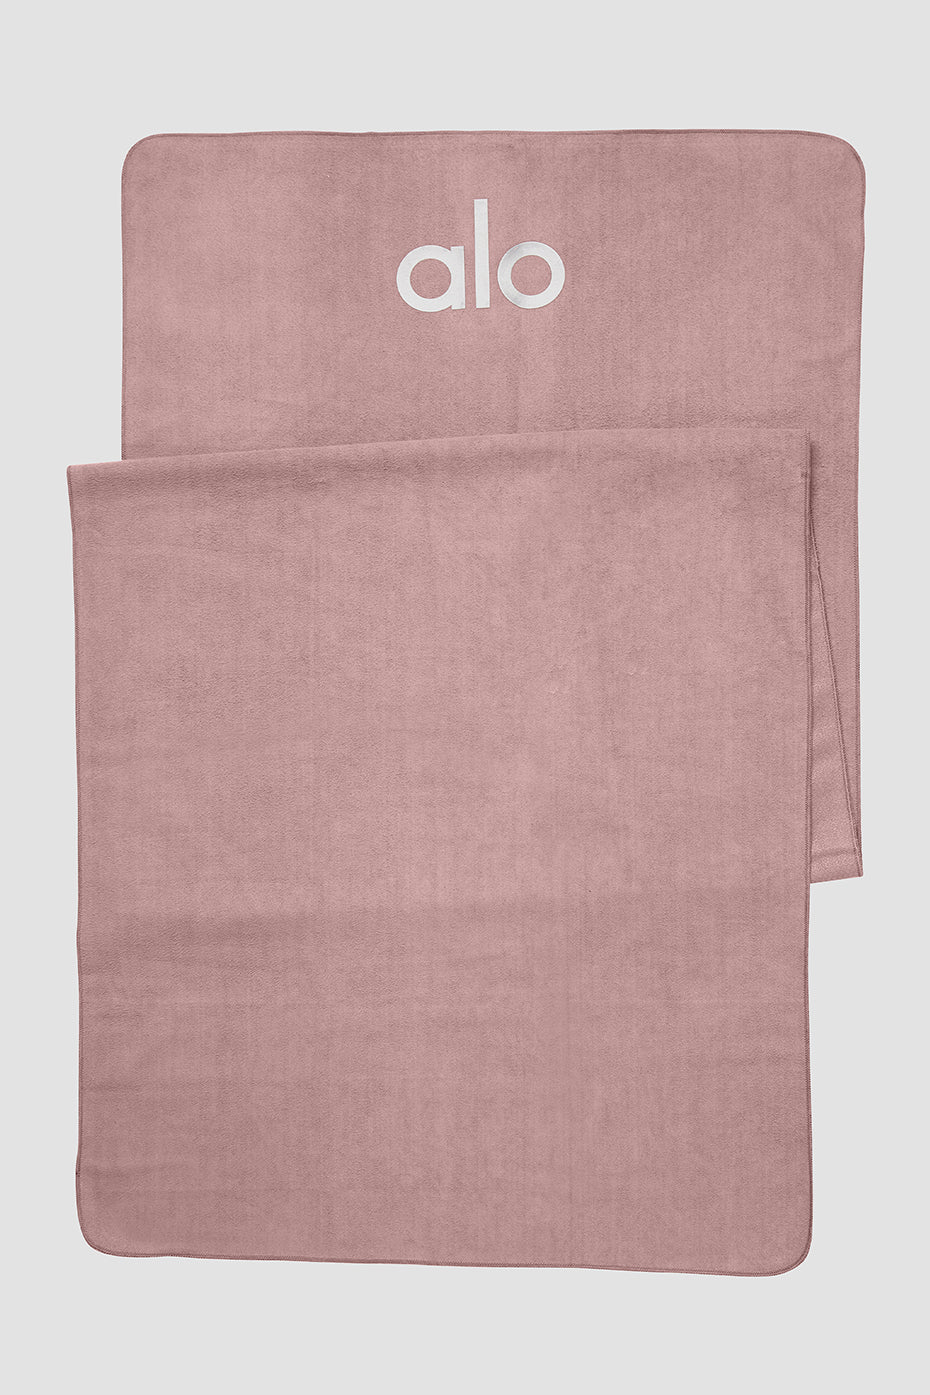 Alo Yoga Grounded No-Slip Mat Towel, Hot Pink, One size : :  Sports & Outdoors